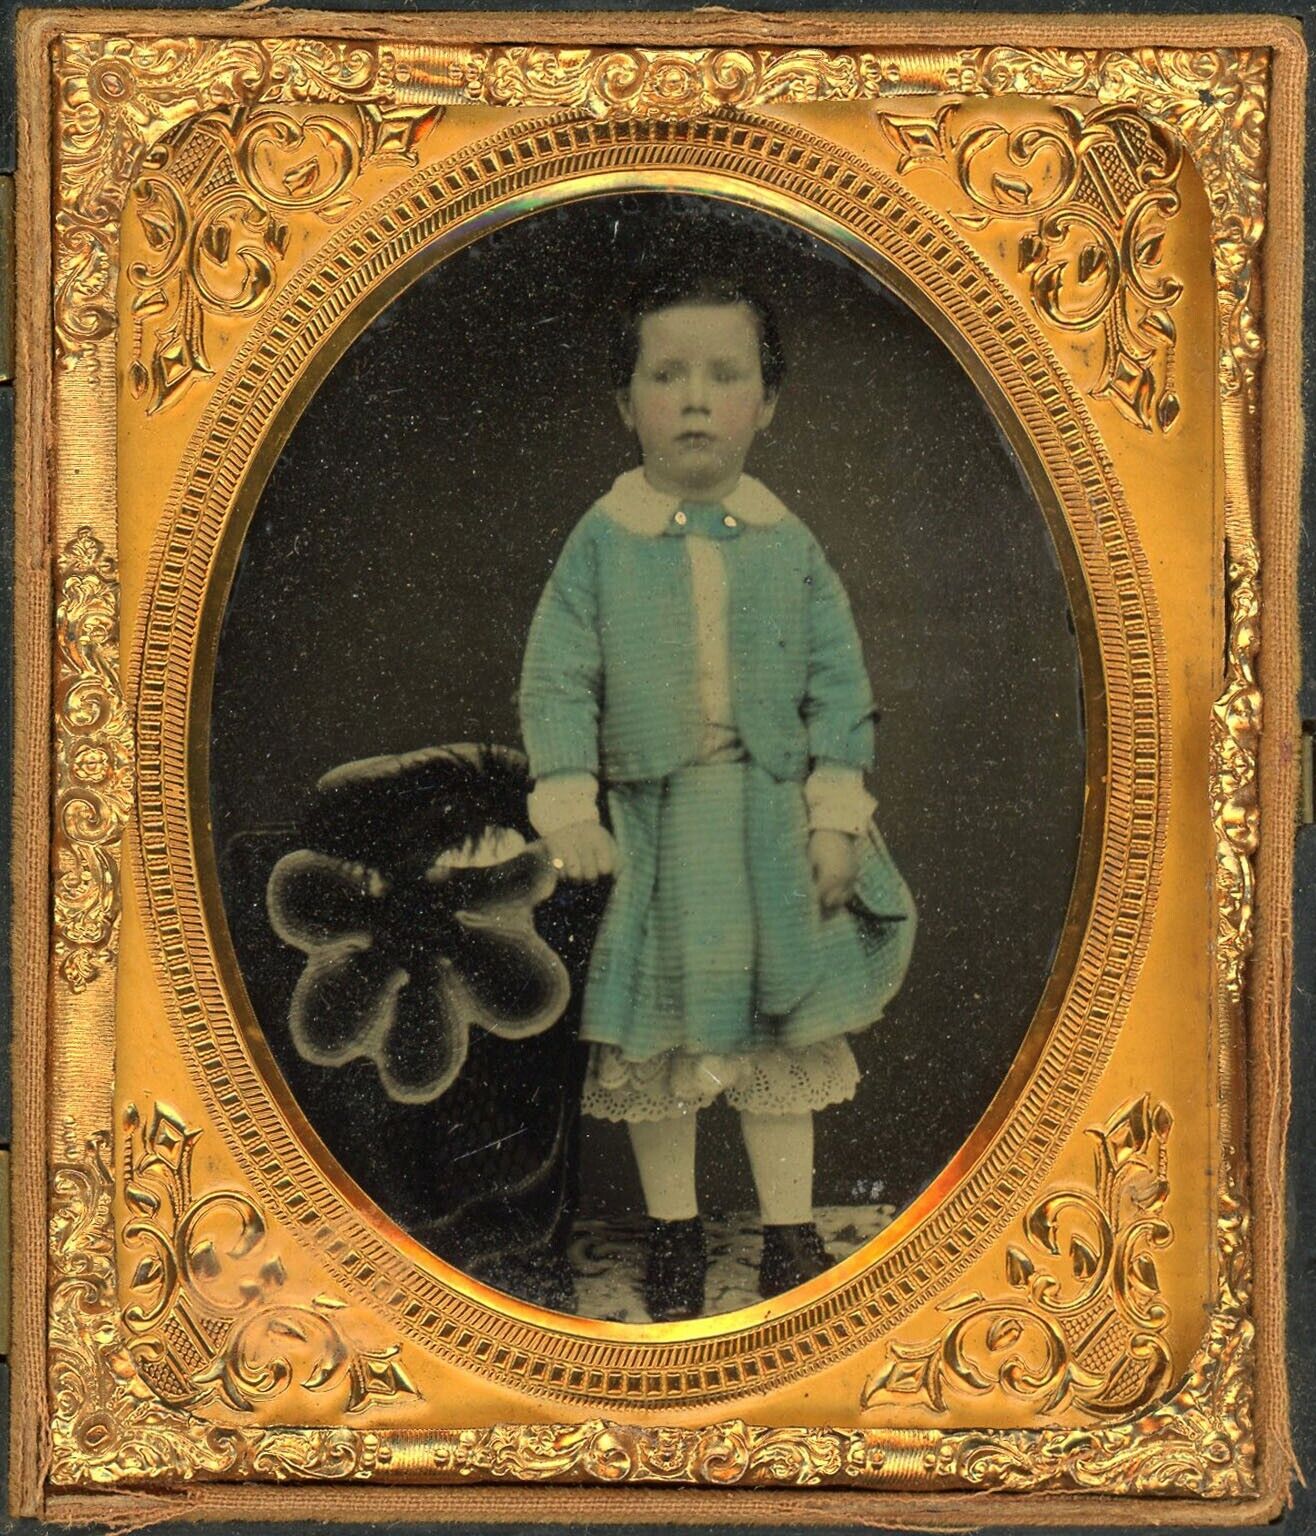 BOY DECKED OUT IN TURQUOISE SKIRT AND JACKET WEARING BLOOMERS AMBROTYPE